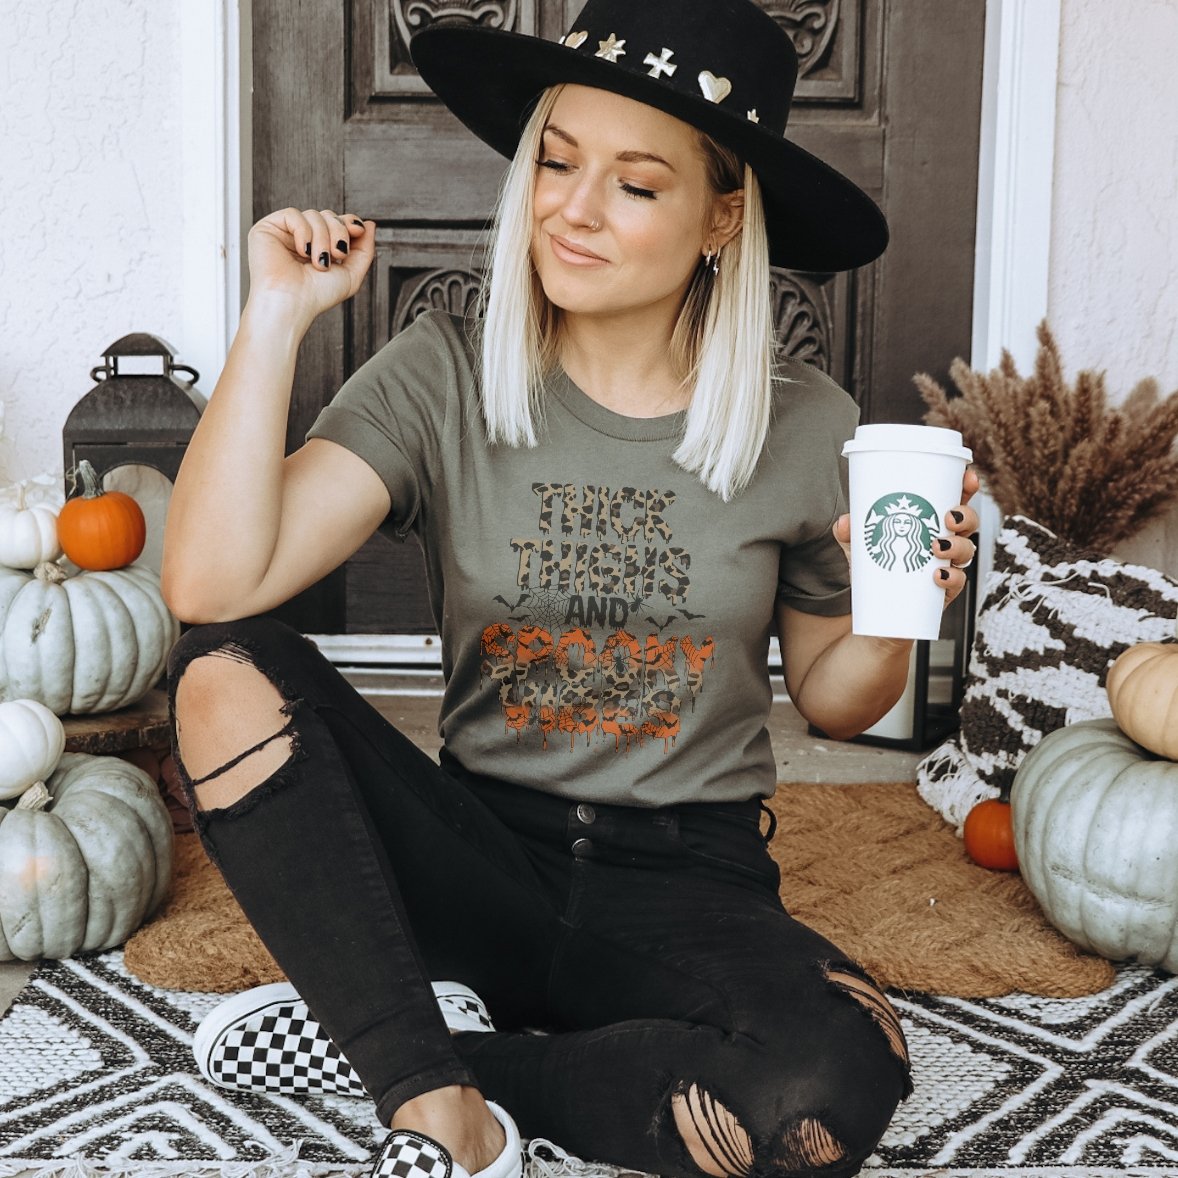 Thick Thighs and Spooky Vibes T-Shirt - Trendznmore